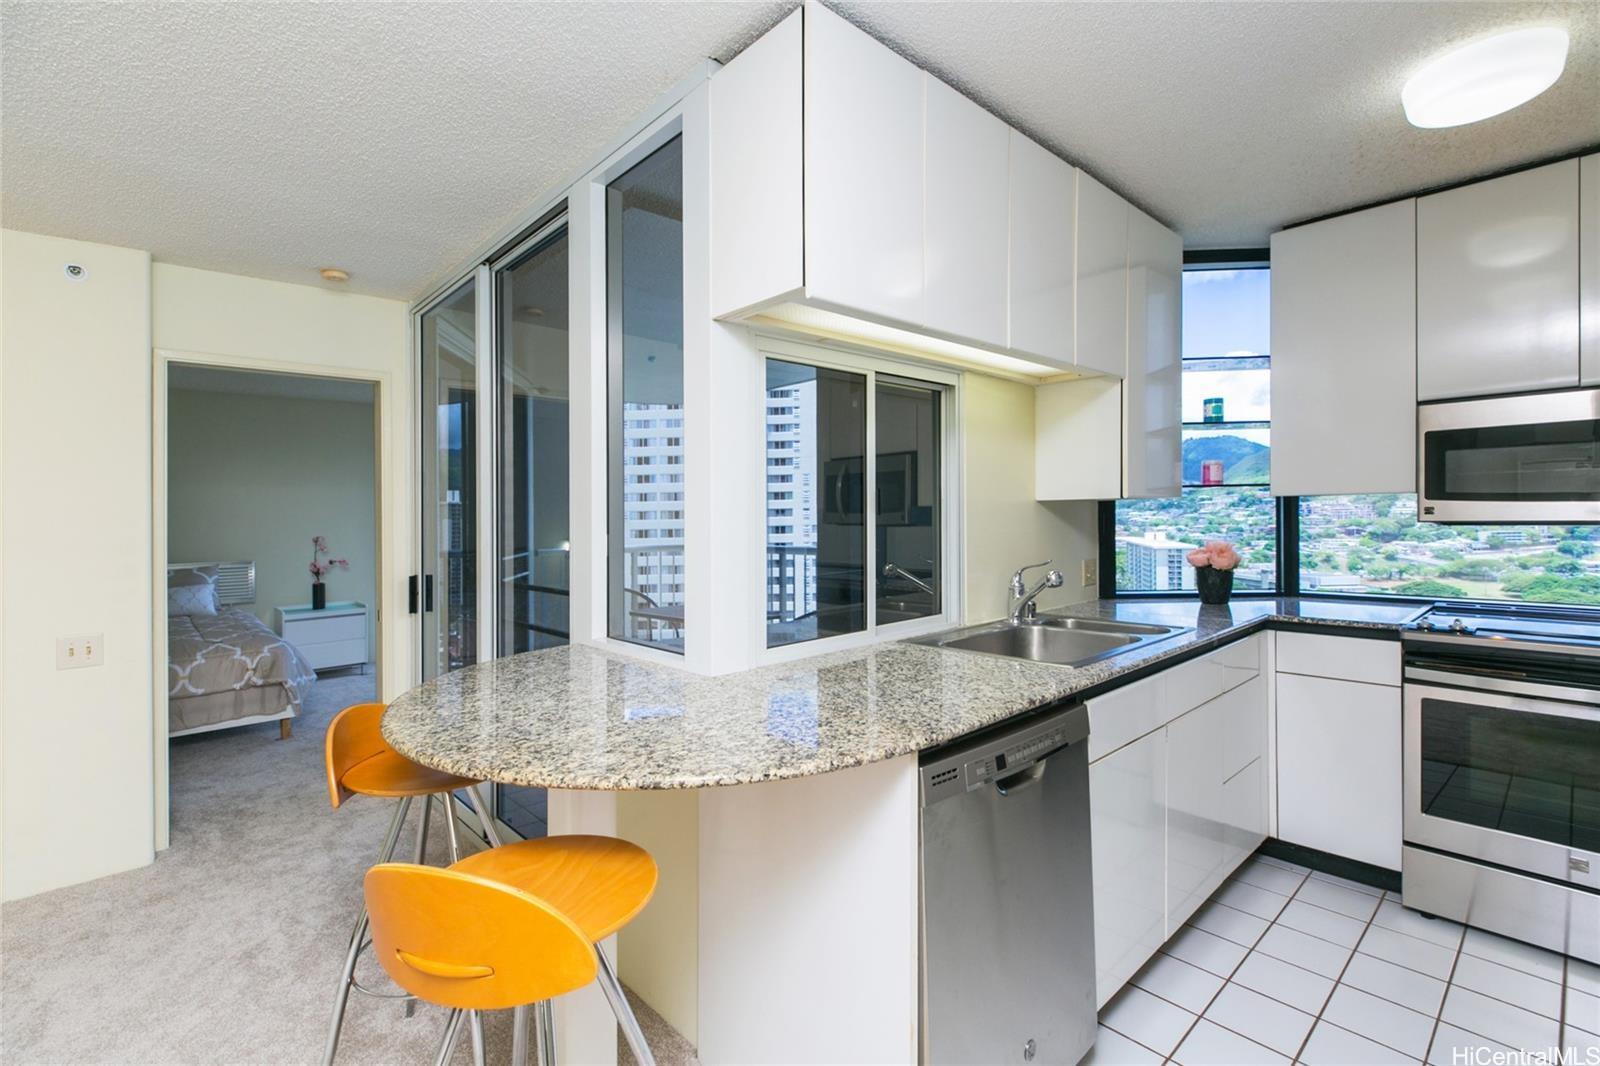 a kitchen with stainless steel appliances granite countertop a sink and a counter top space